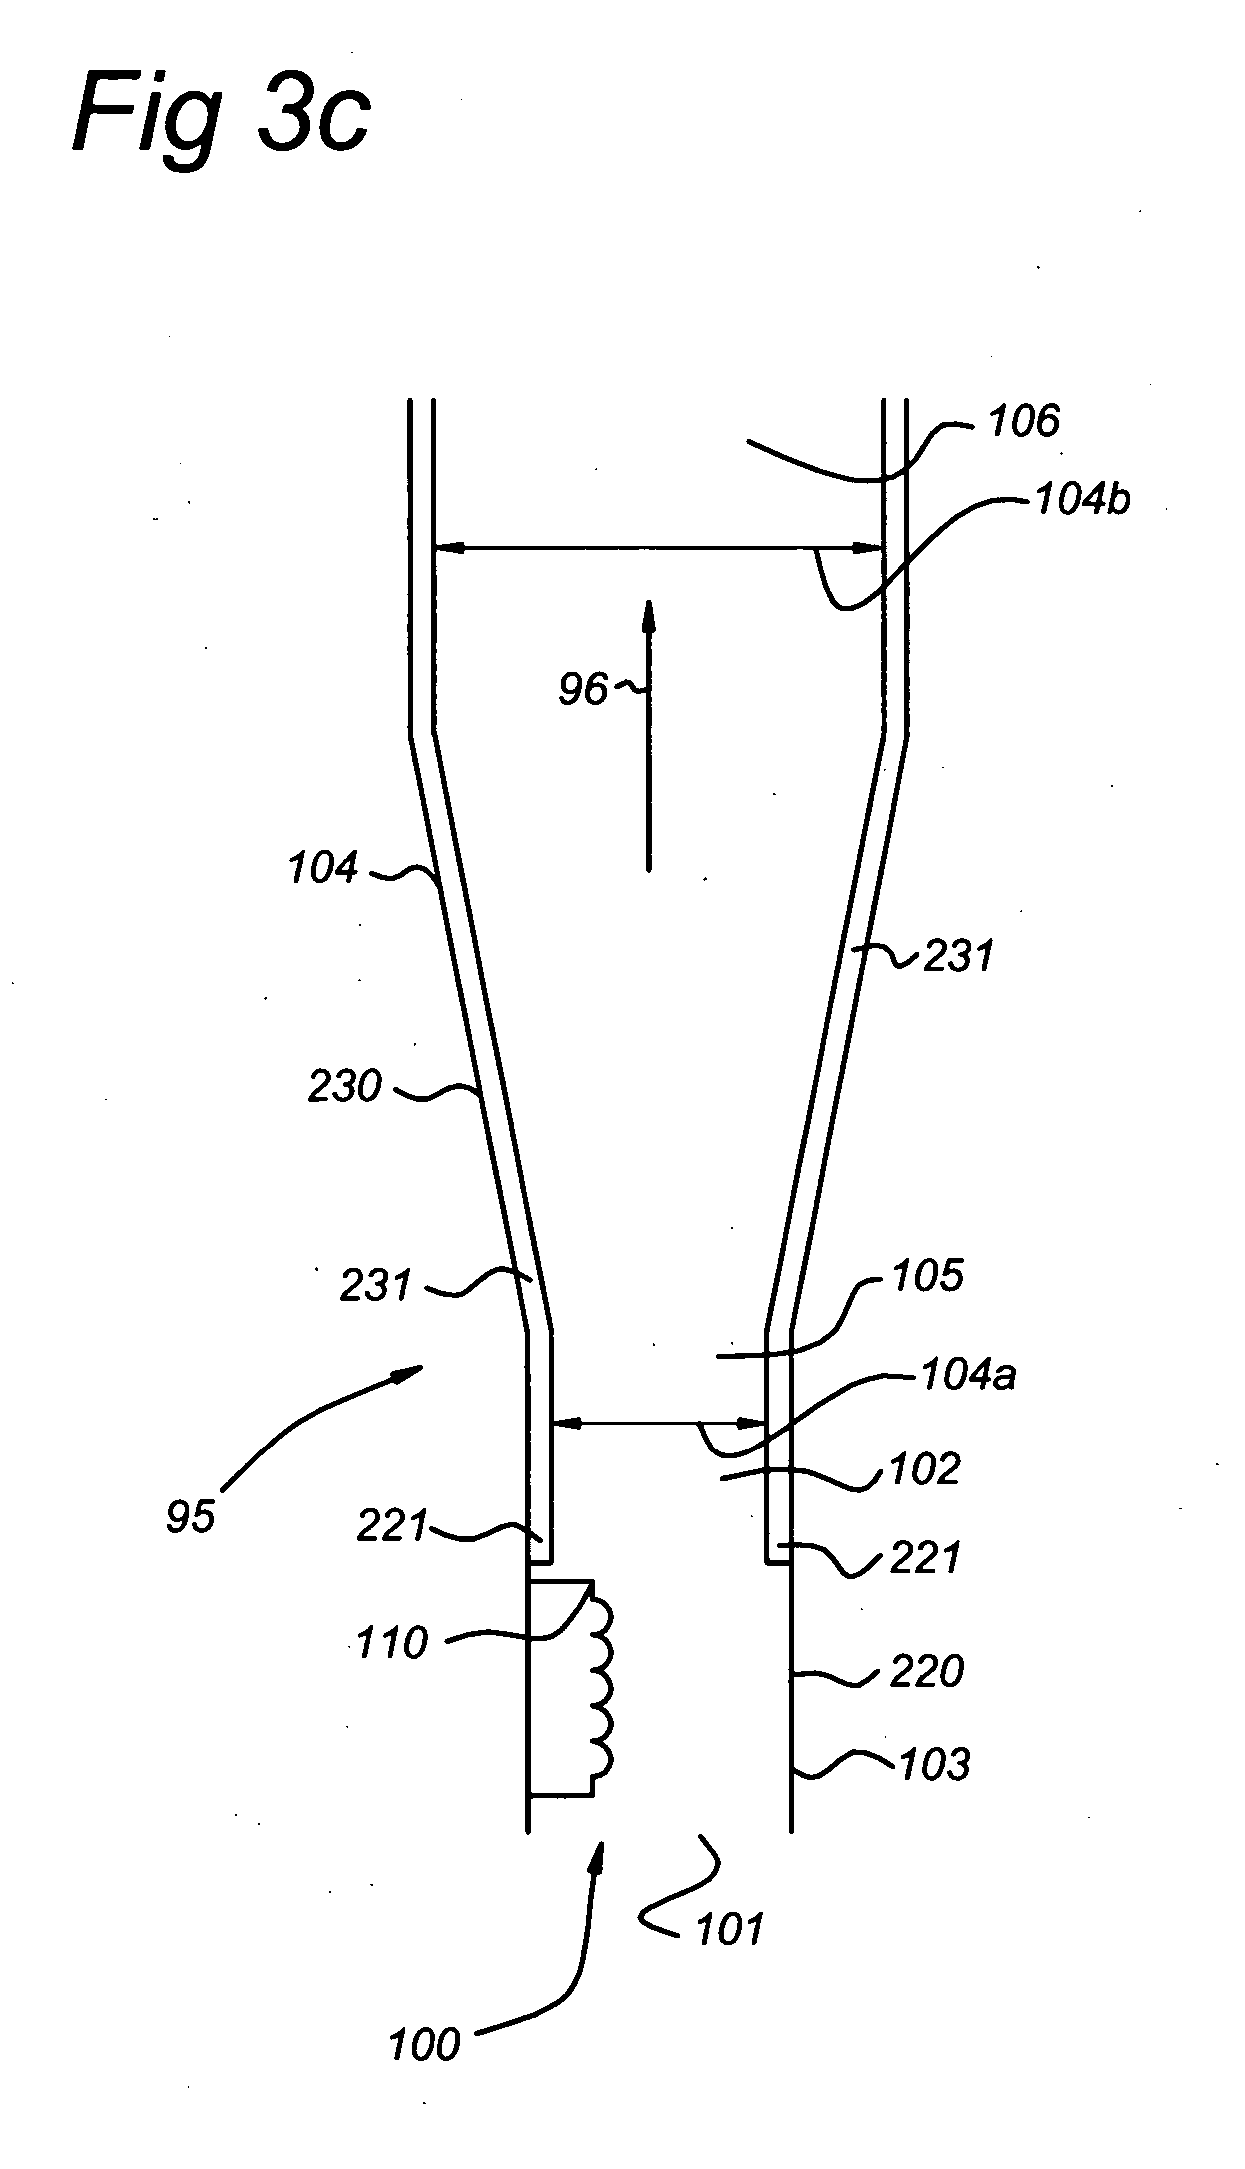 Lithographic apparatus including a cleaning device and method for cleaning an optical element